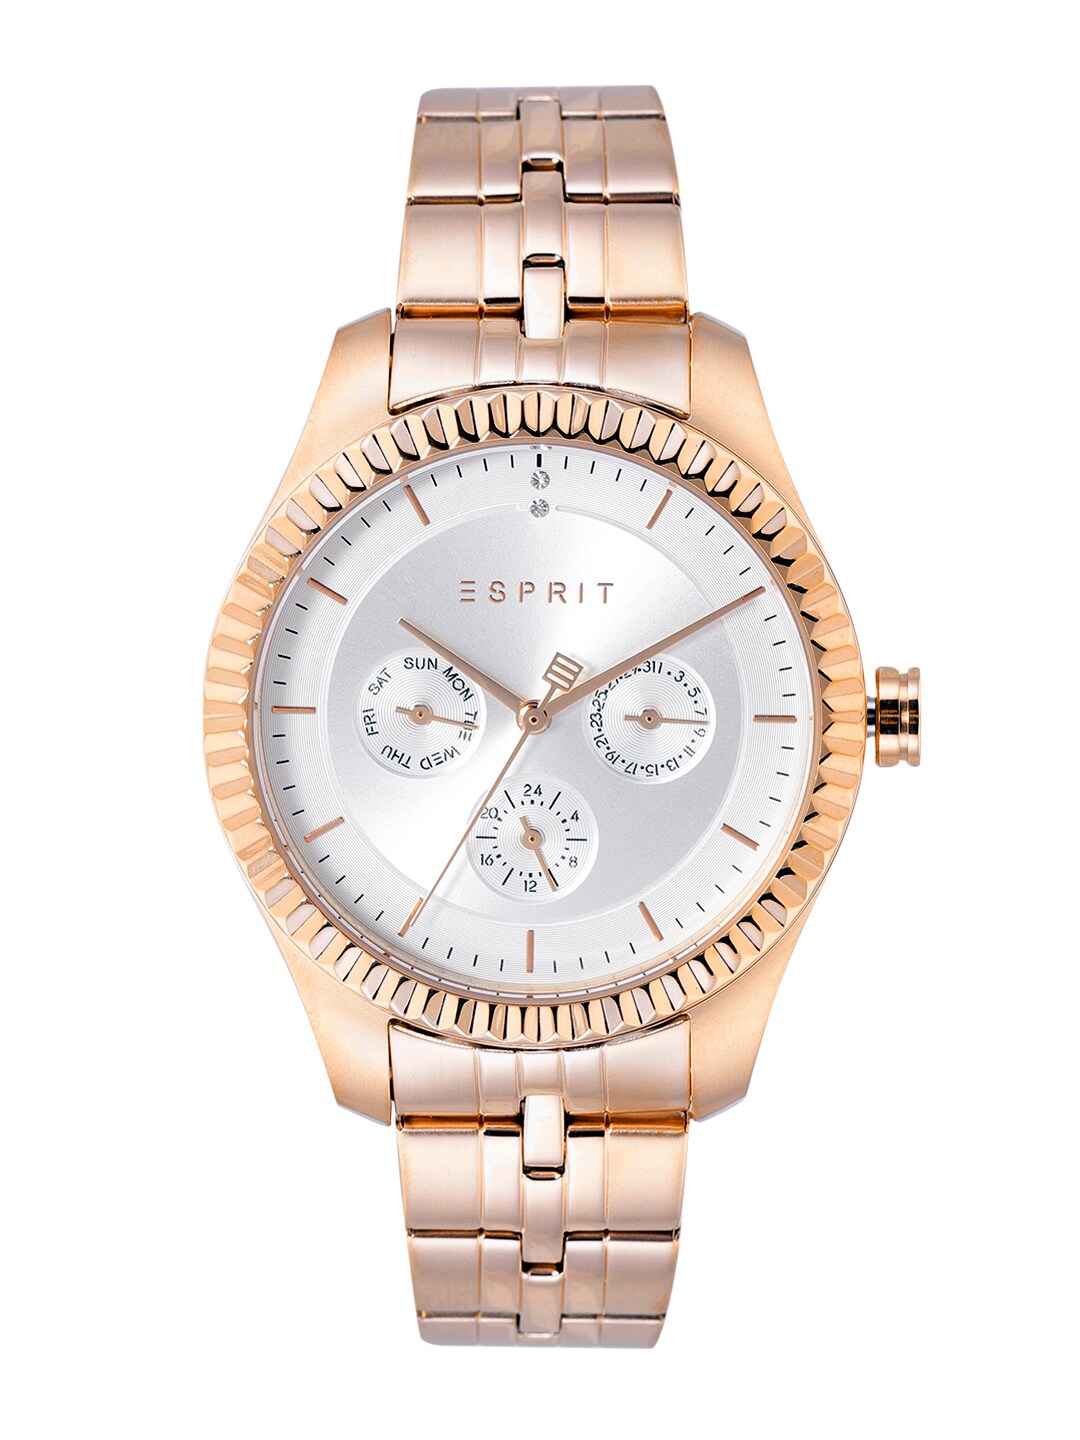 ESPRIT Women Silver-Toned Analogue Chronograph Watch ES1L202M0095 Price in India